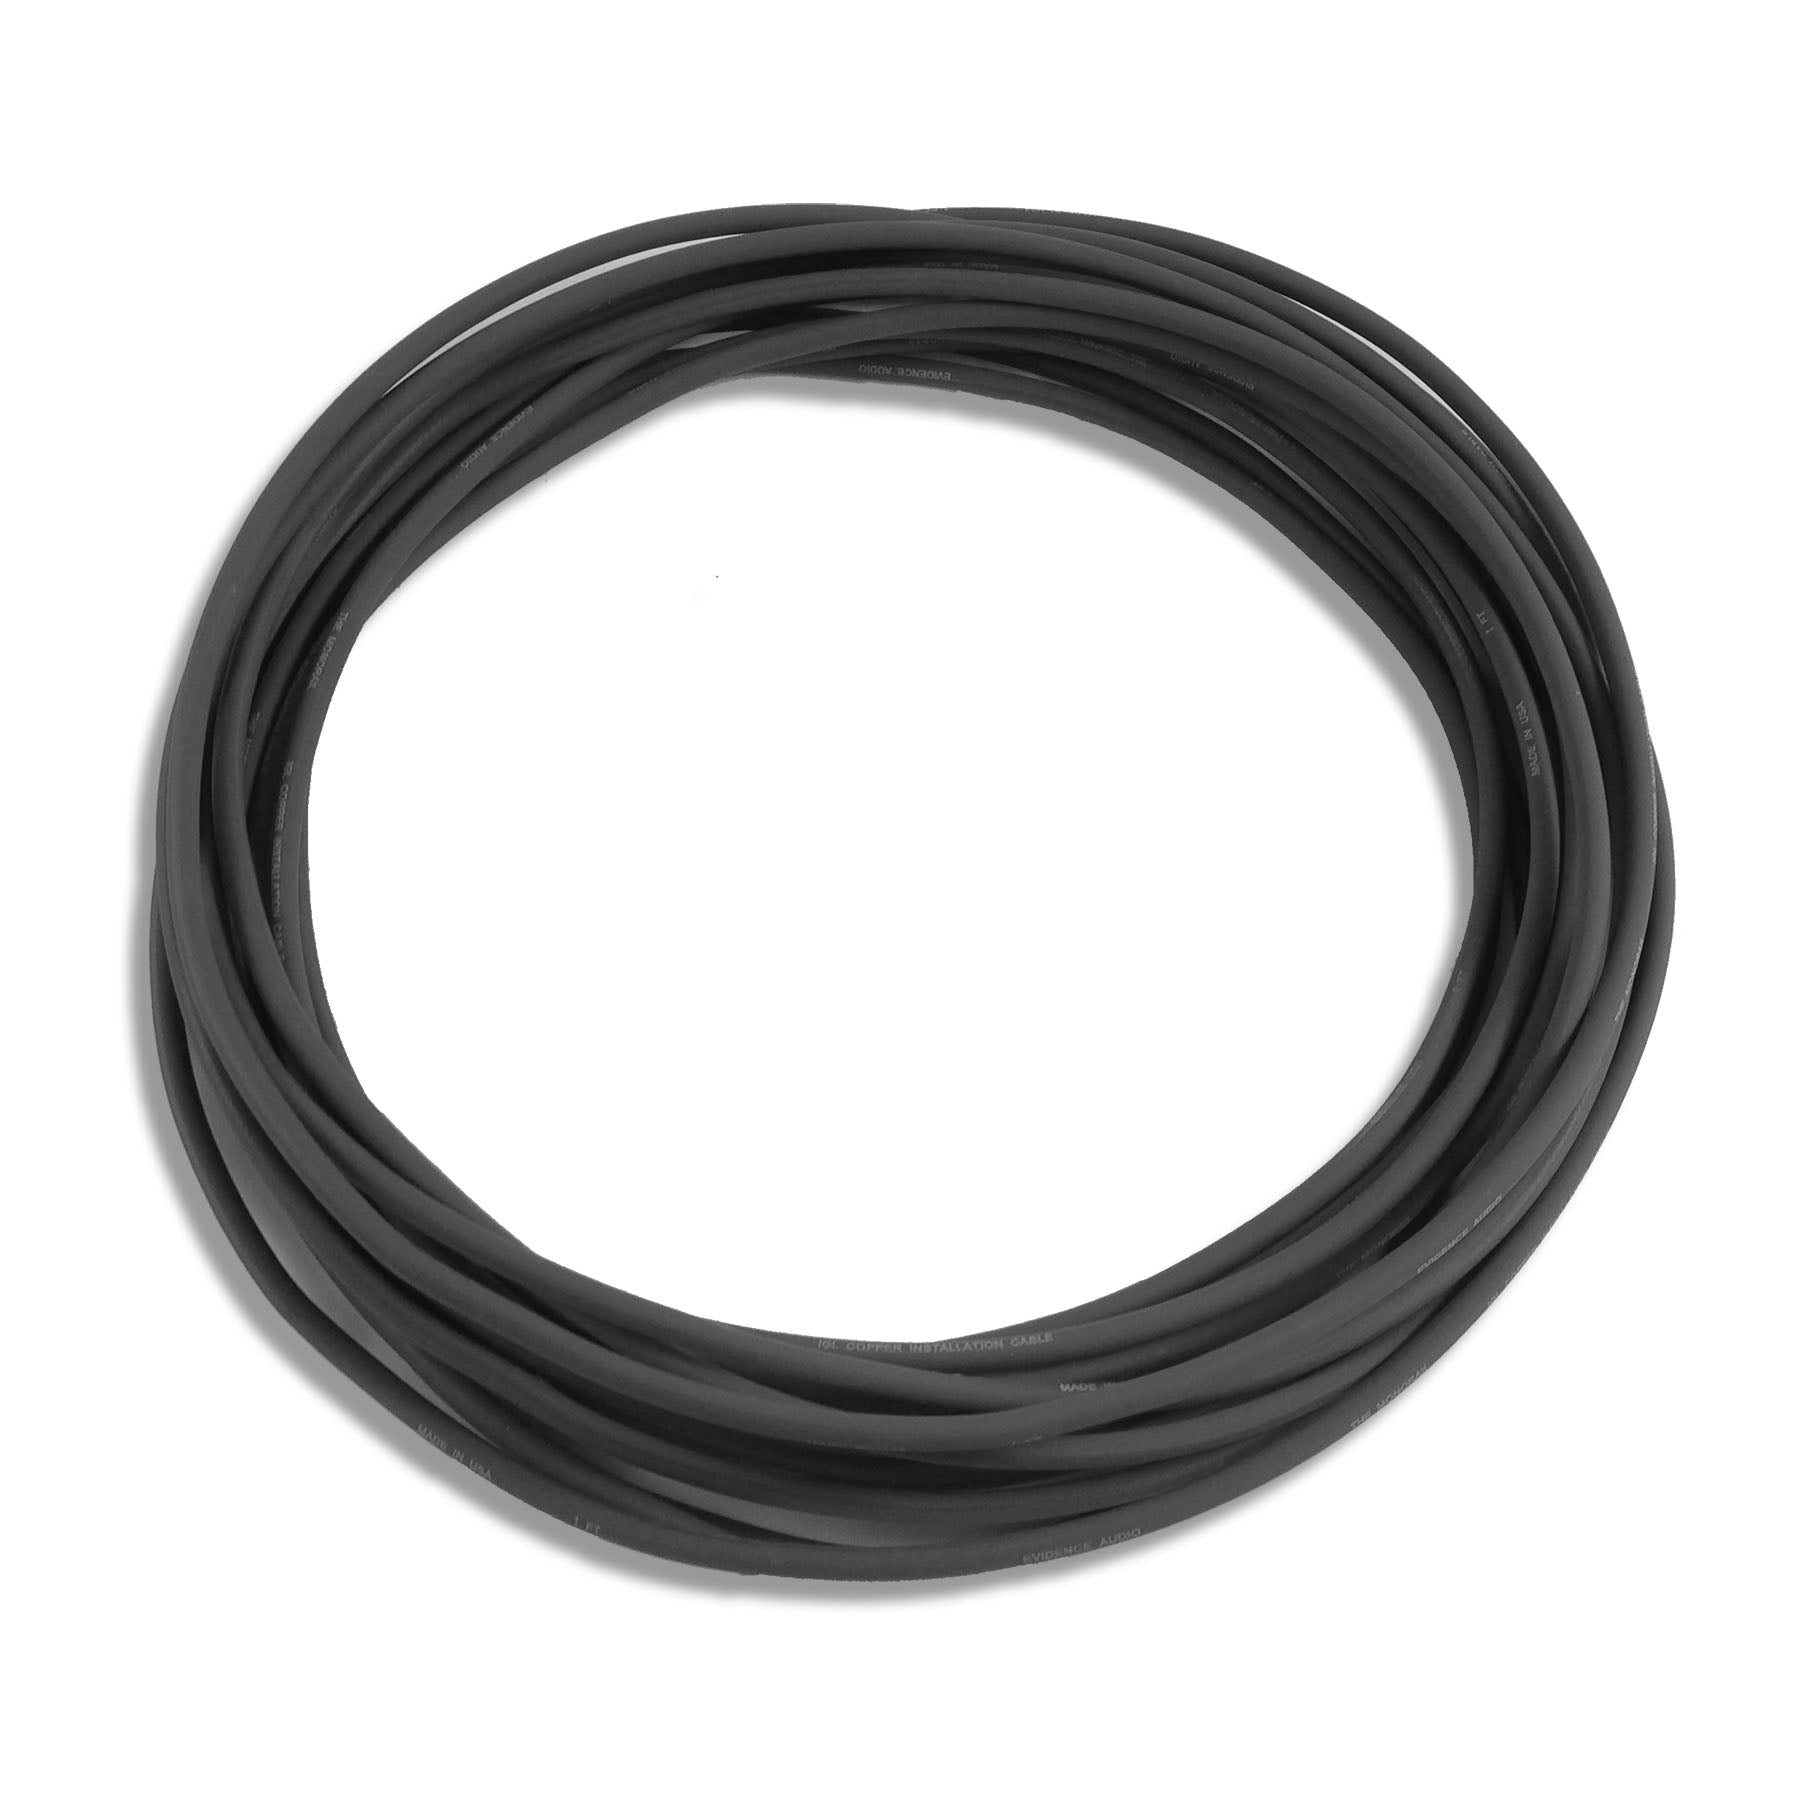 Evidence Audio Monorail Cable in Black. Example Only. Quantity  will vary depending on kit selected